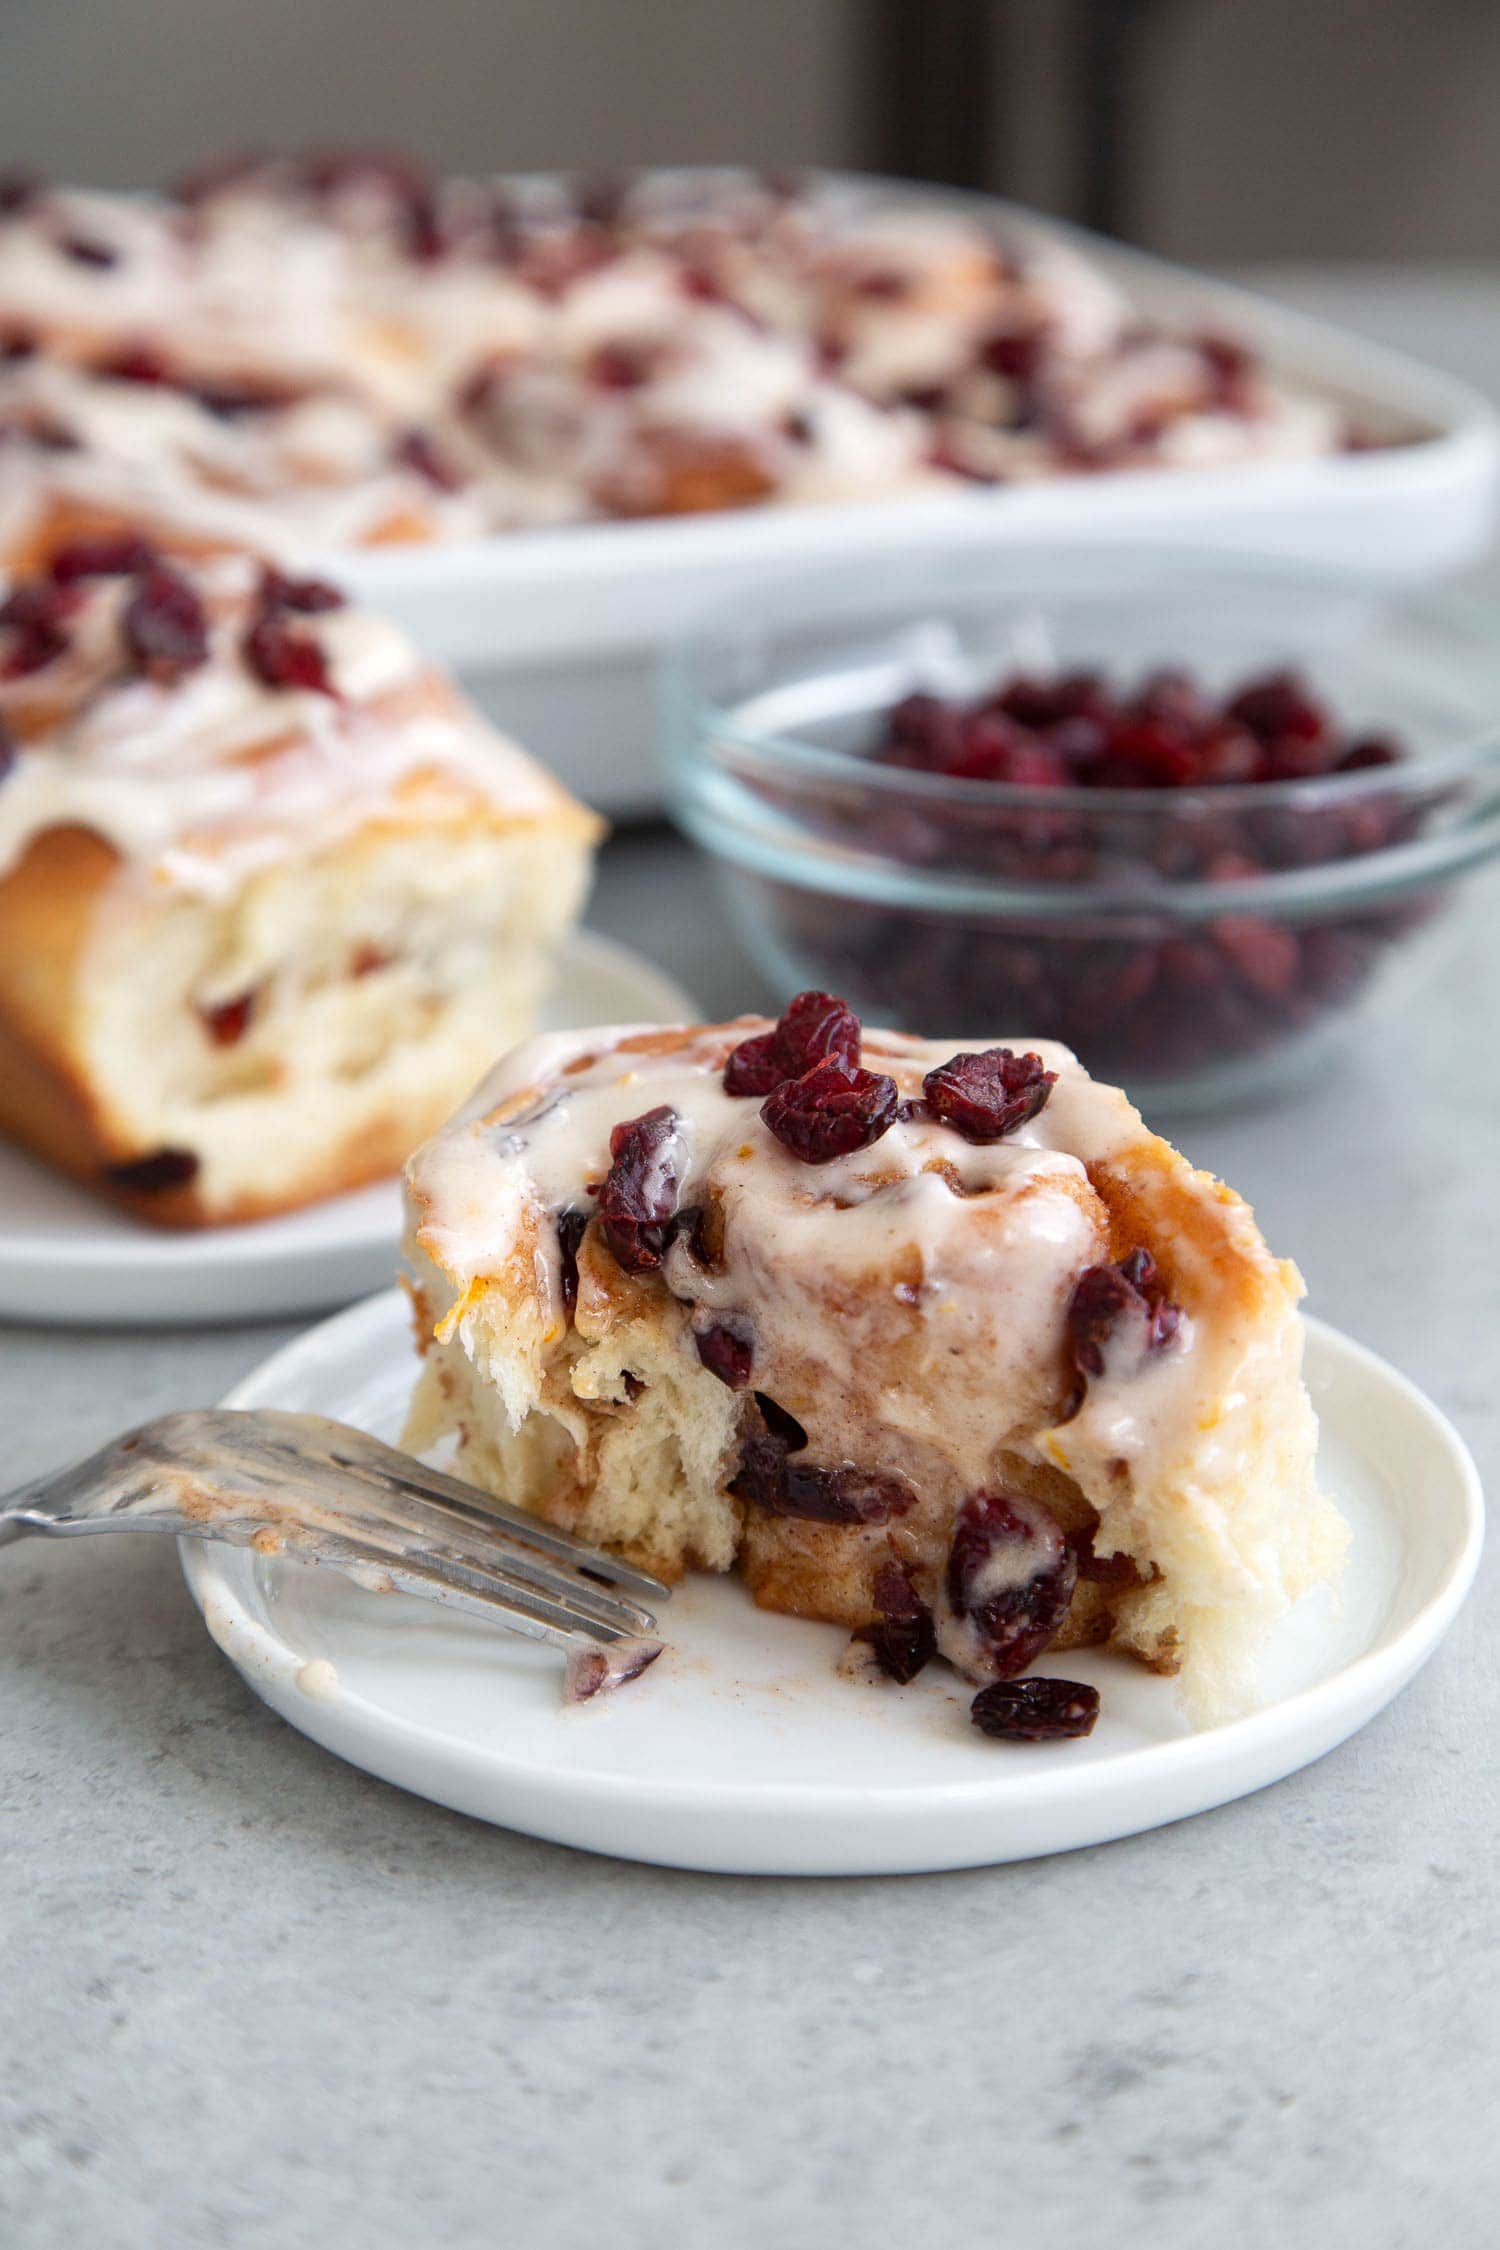 Spiced Cranberry Rolls. Elevate the standard cinnamon rolls with a punch of cranberries! These rolls have dried cranberries mixed into the dough as well as the filling. It’s flavored with the warm, inviting flavors of pumpkin pie spice mix and ground cinnamon.